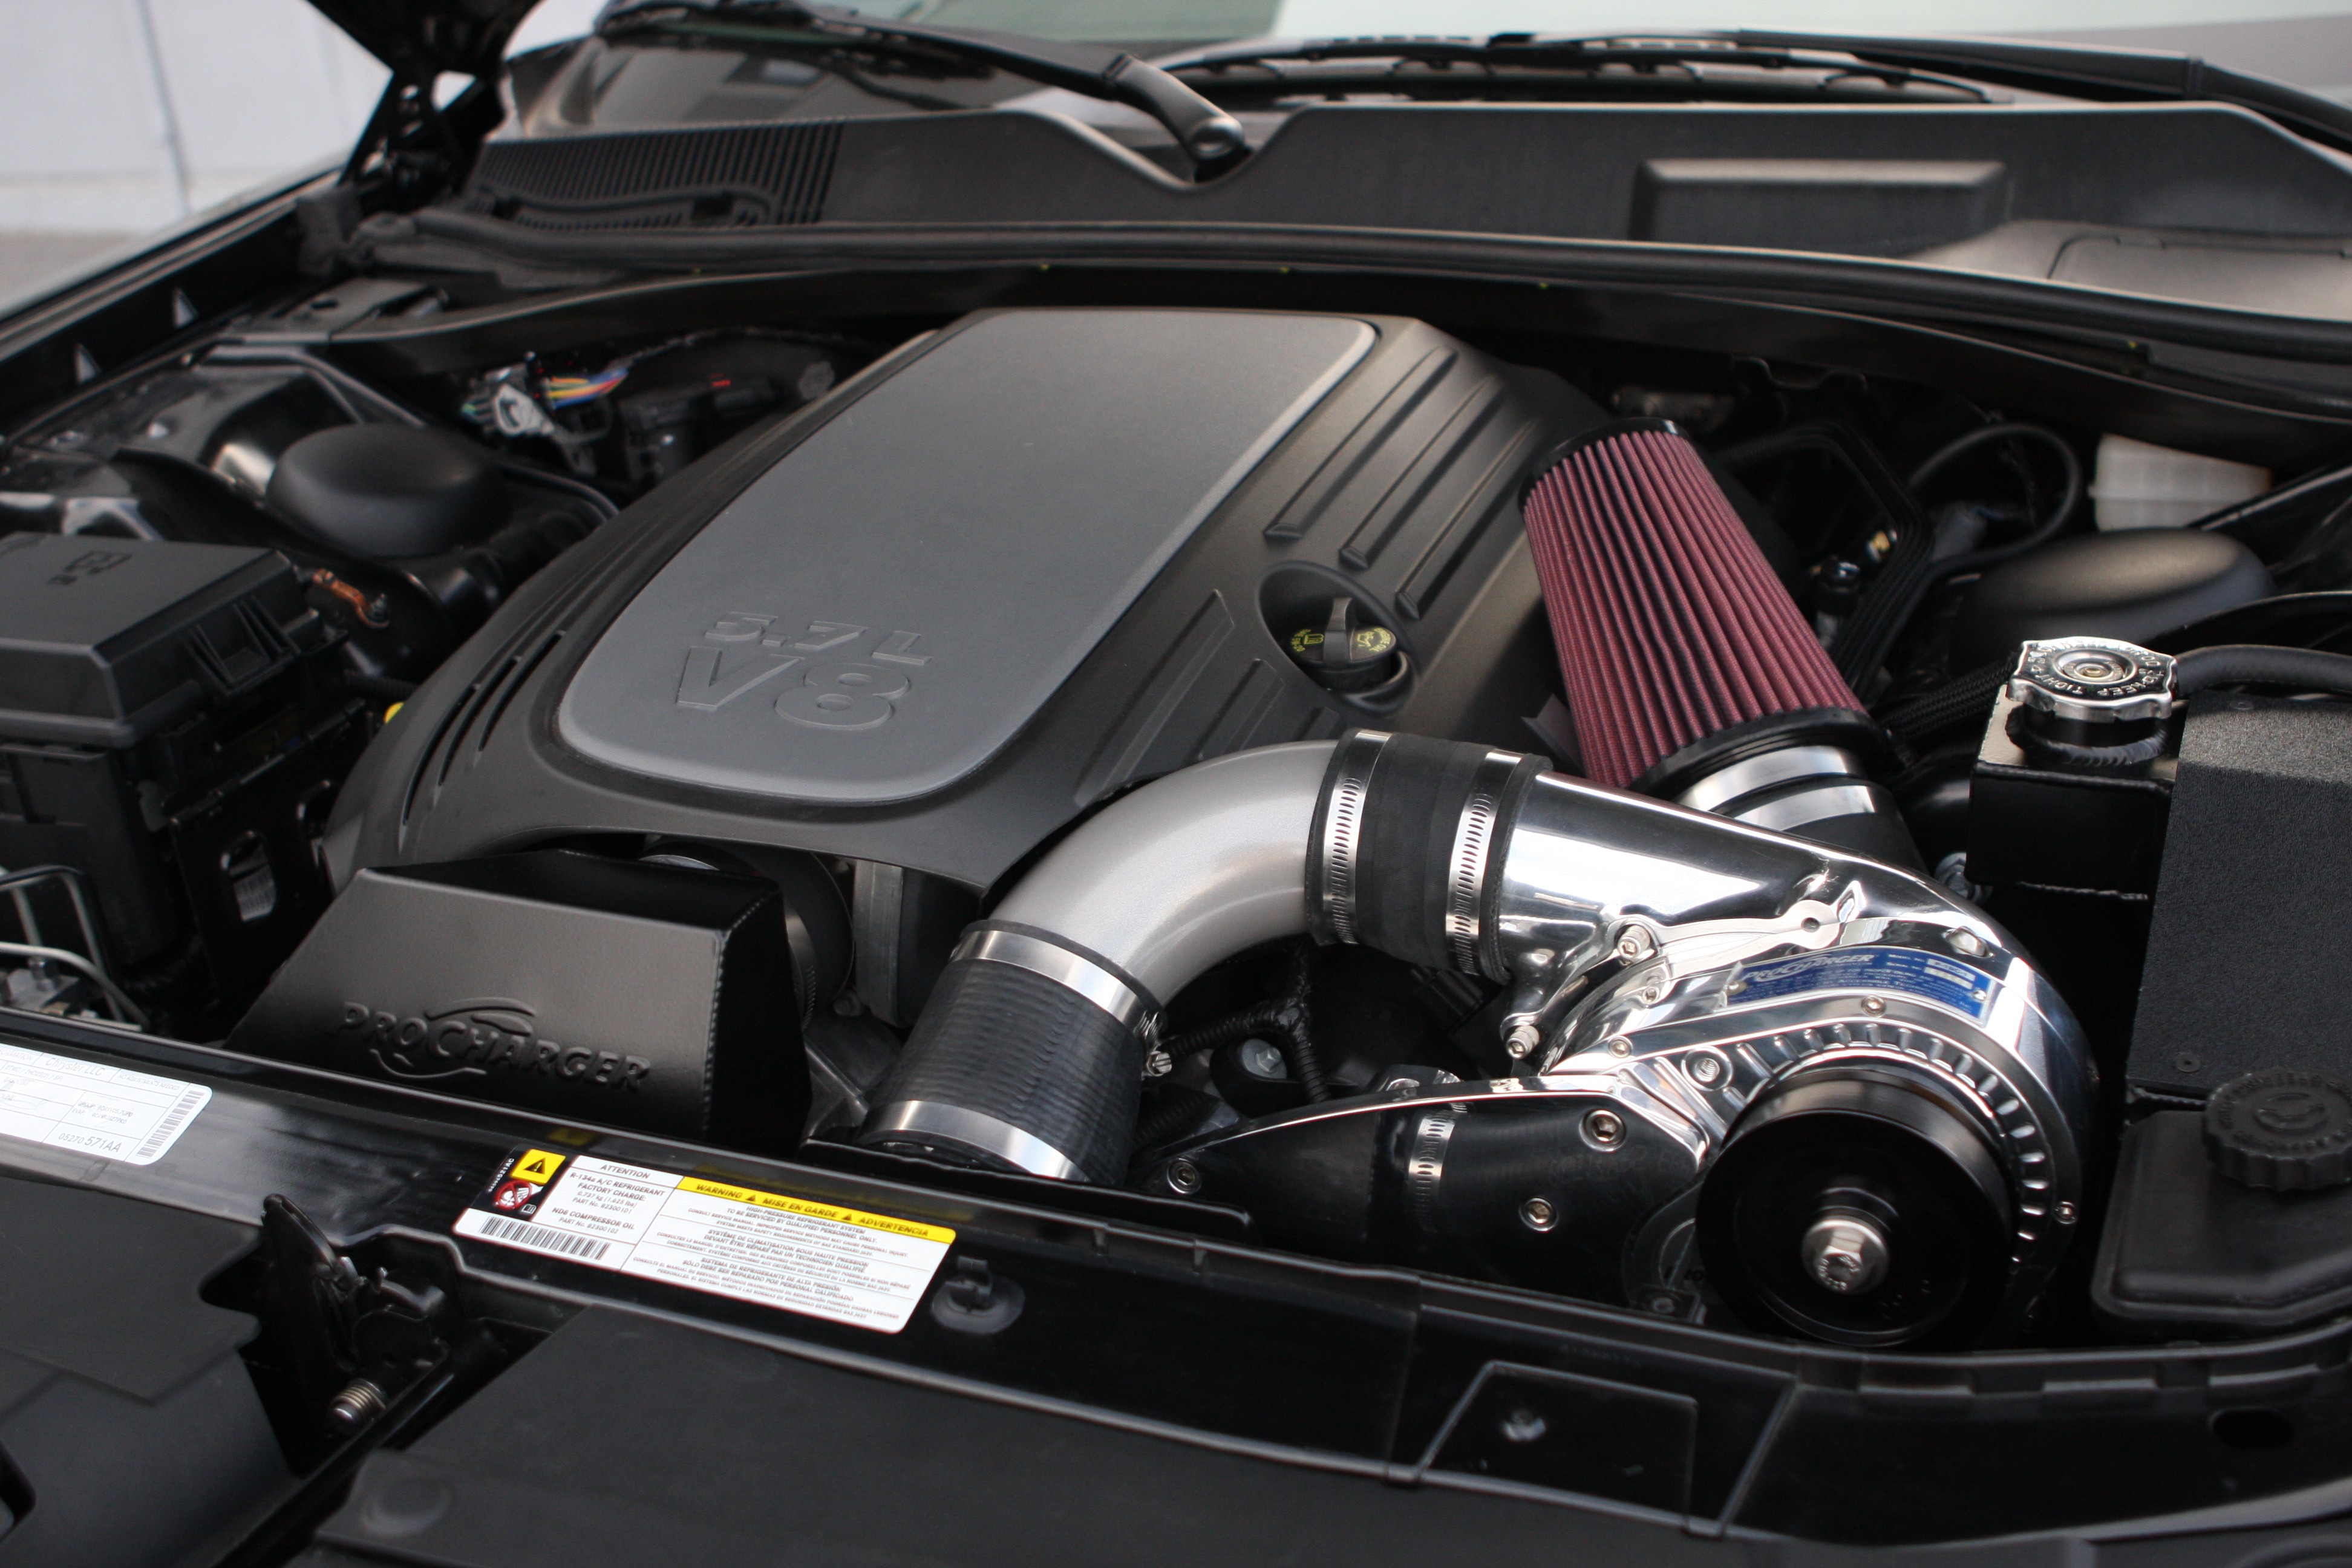 ProCharger was the first to offer complete supercharger systems for the 6.4...